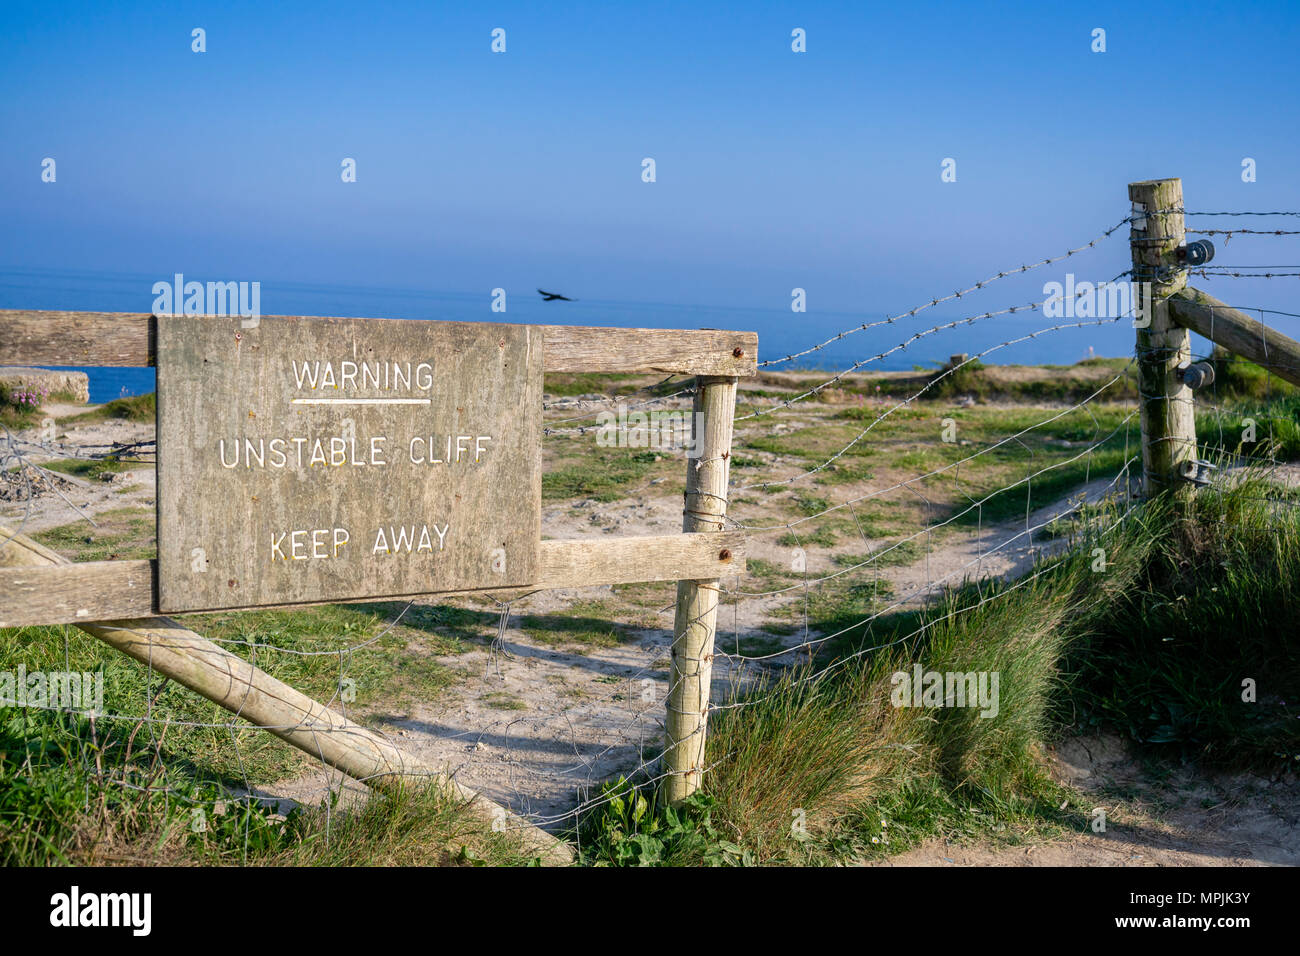 A wooden warning sign advising of an unstable cliff - keep away at the Jurassic Coast in Dorset, England, UK Stock Photo